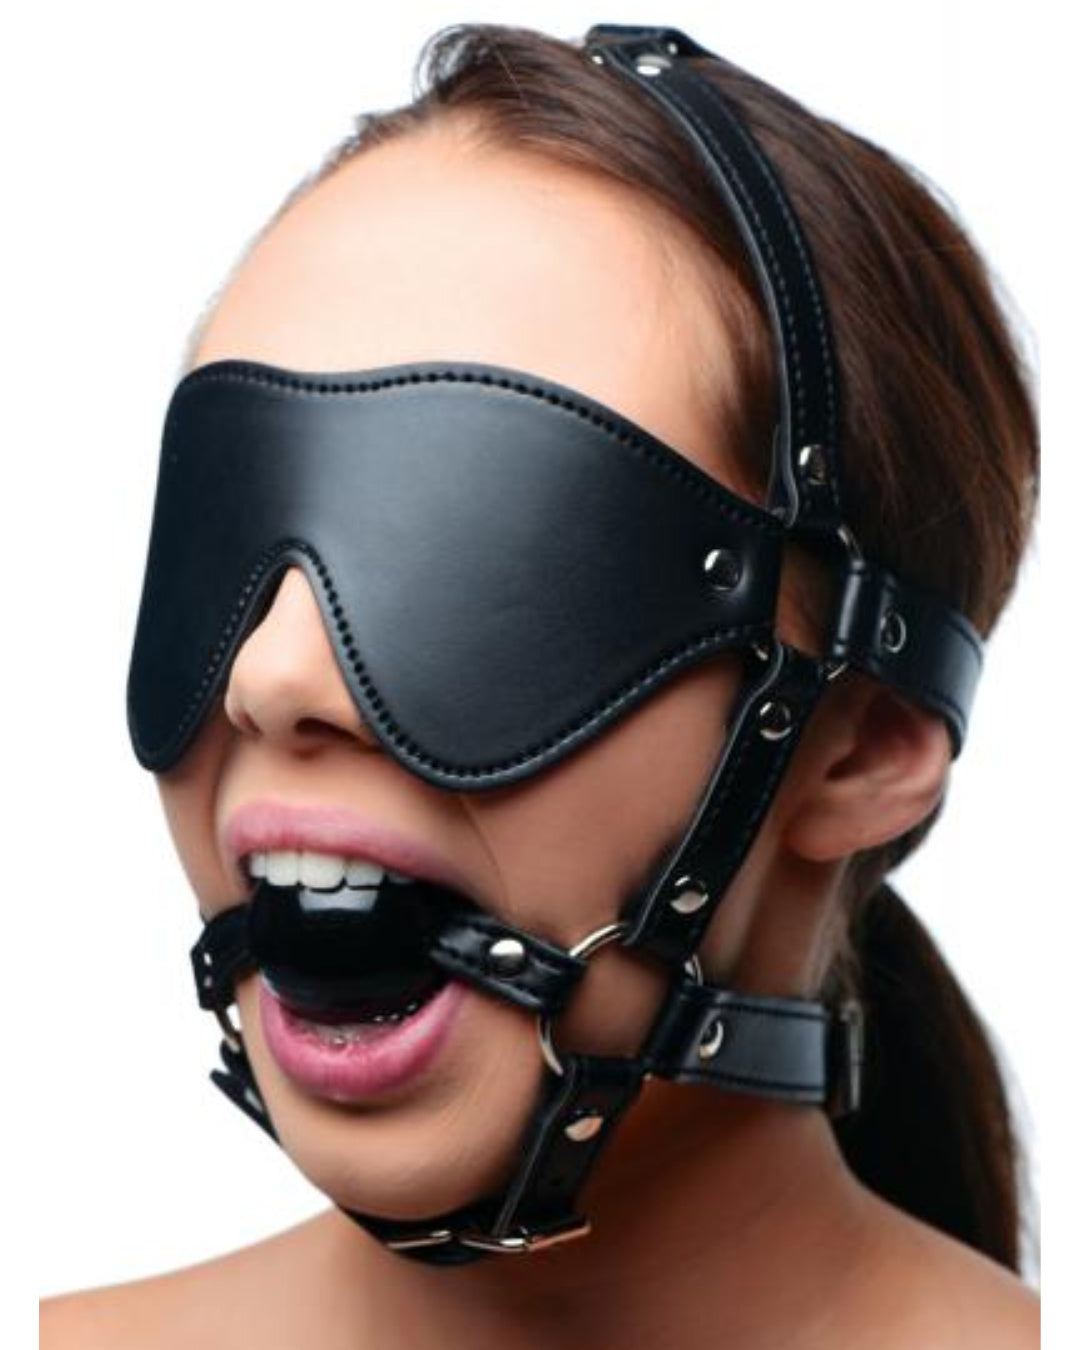 Strict Blindfold Harness Plus Ball Gag Girl wearing it 